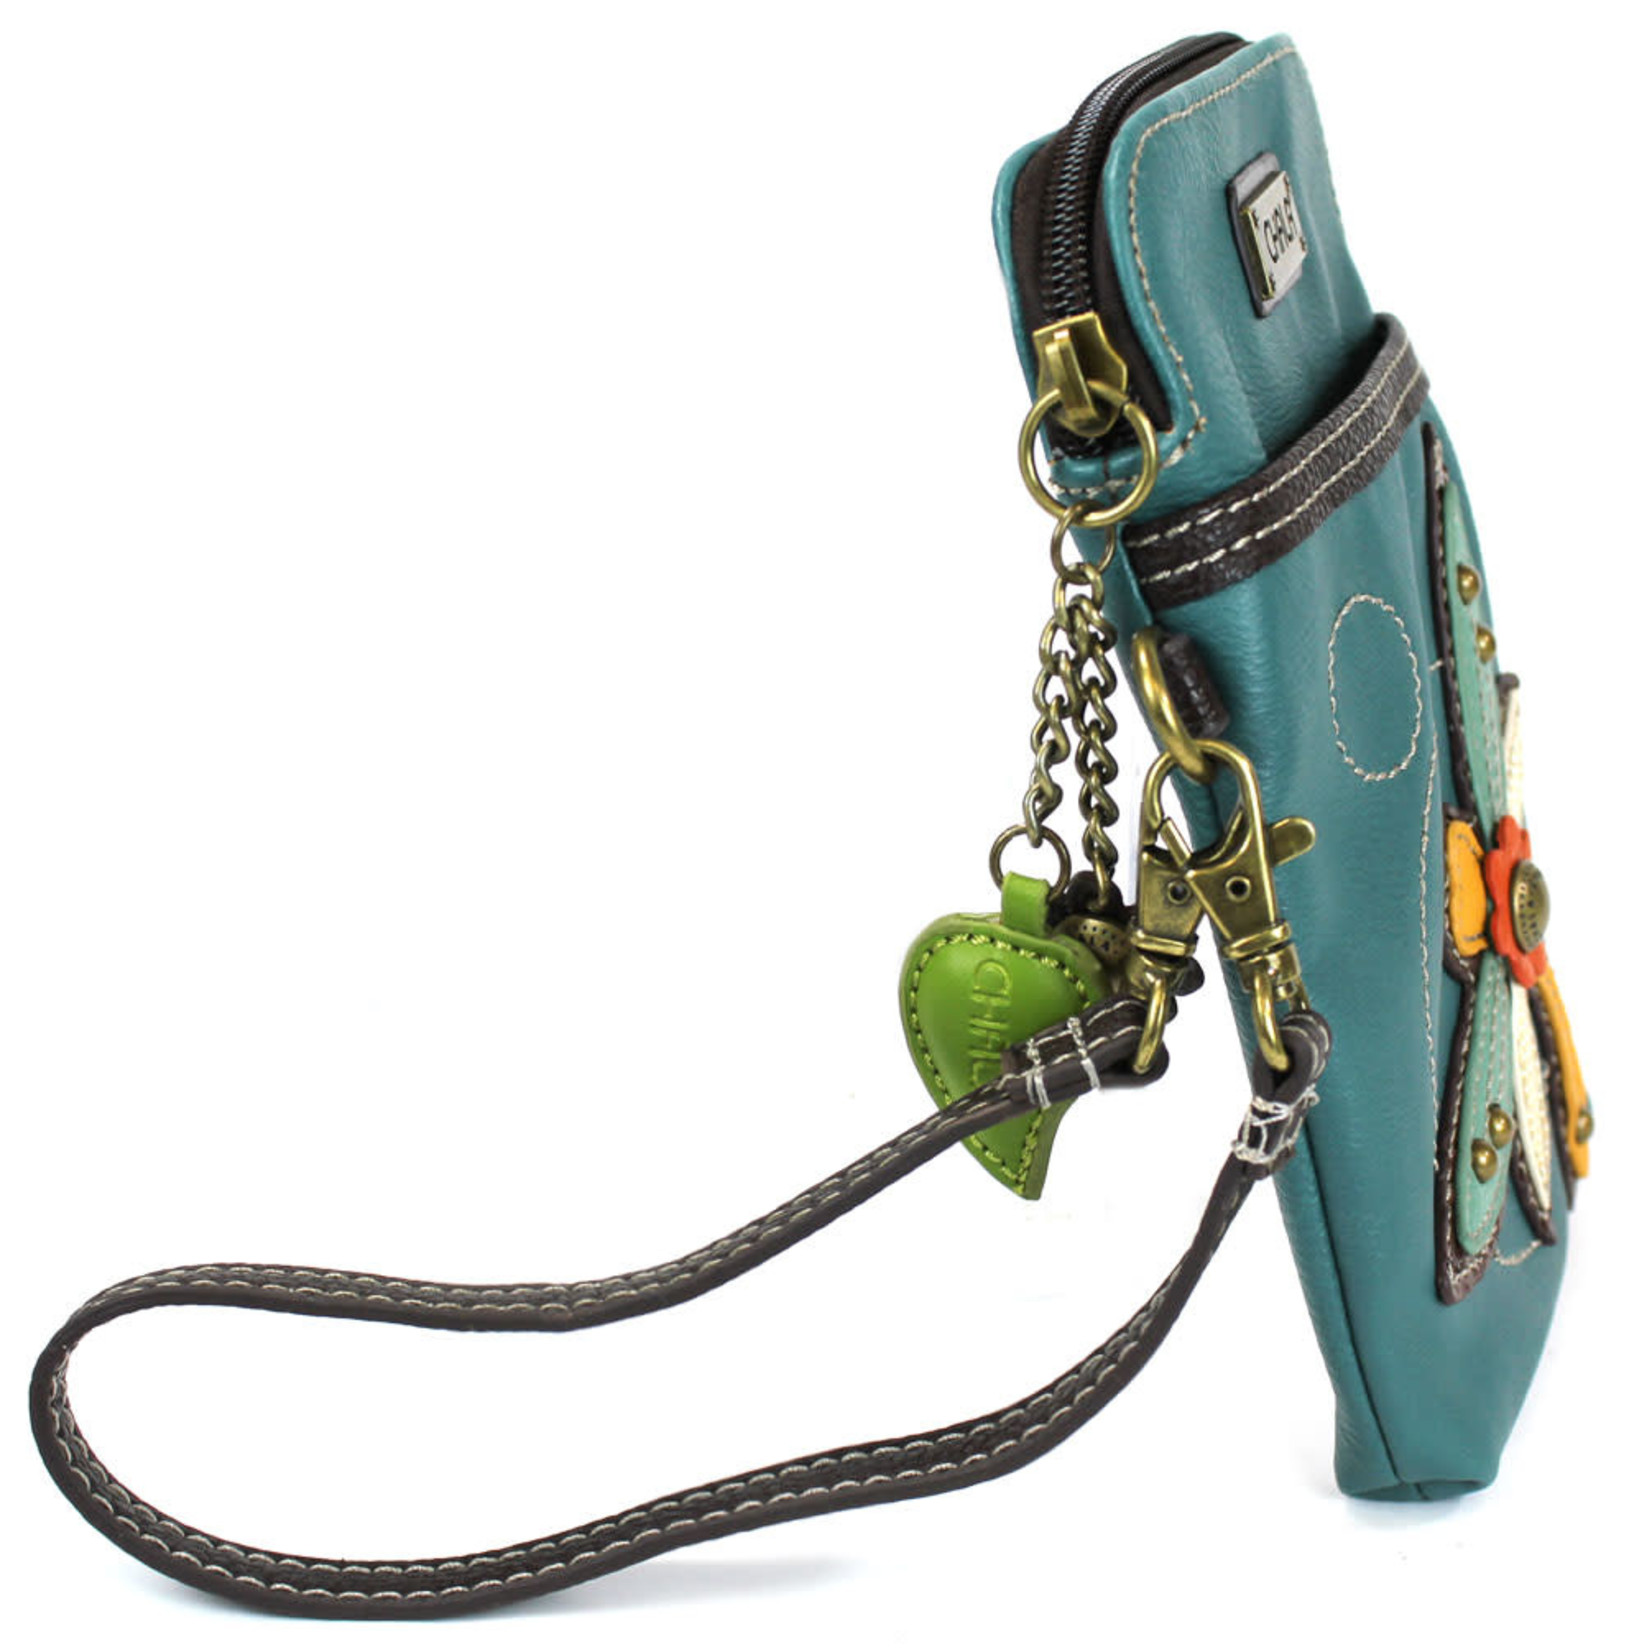 Chala Cell Phone Crossbody Dragonfly Turquoise